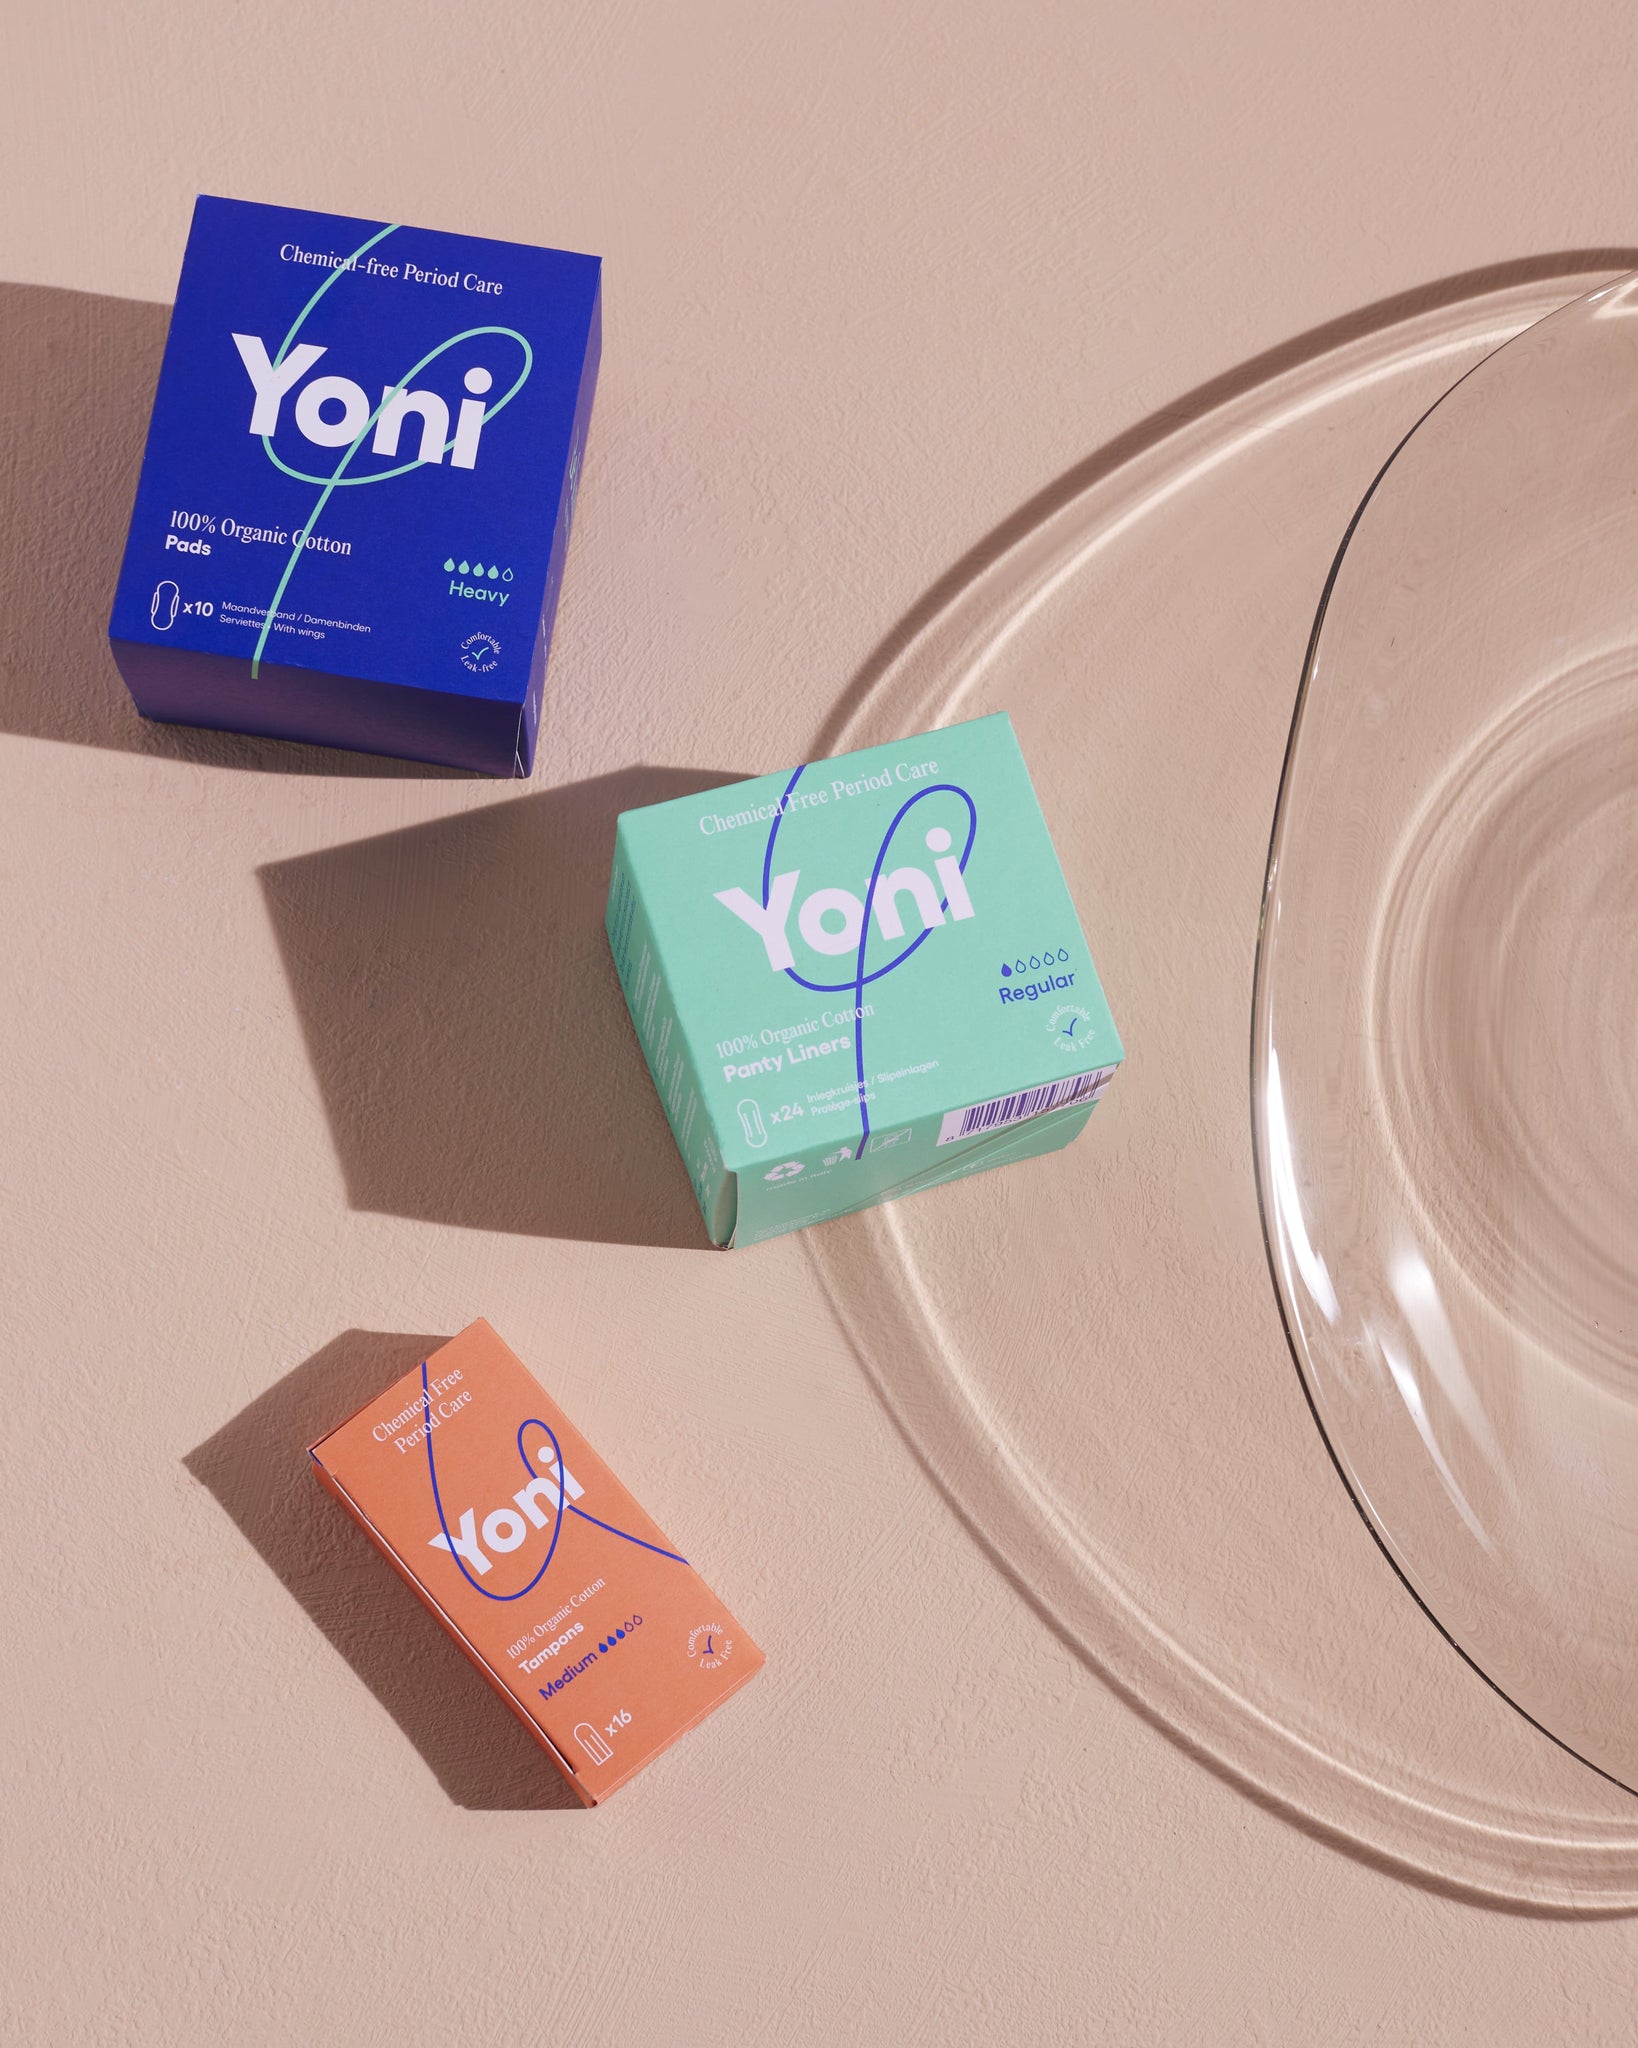 Yoni Applicator Tampons,Medium, Regular, Comfortable, Leak Free, 100% Organic,Biodegradable, Compostable, Cotton, Sustainable Living, Eco Sanitary Products, Period Care, No Plastic Films, Hypoallergenic, Care Free Period, Chemical Free, Nourished, Nourishedeu